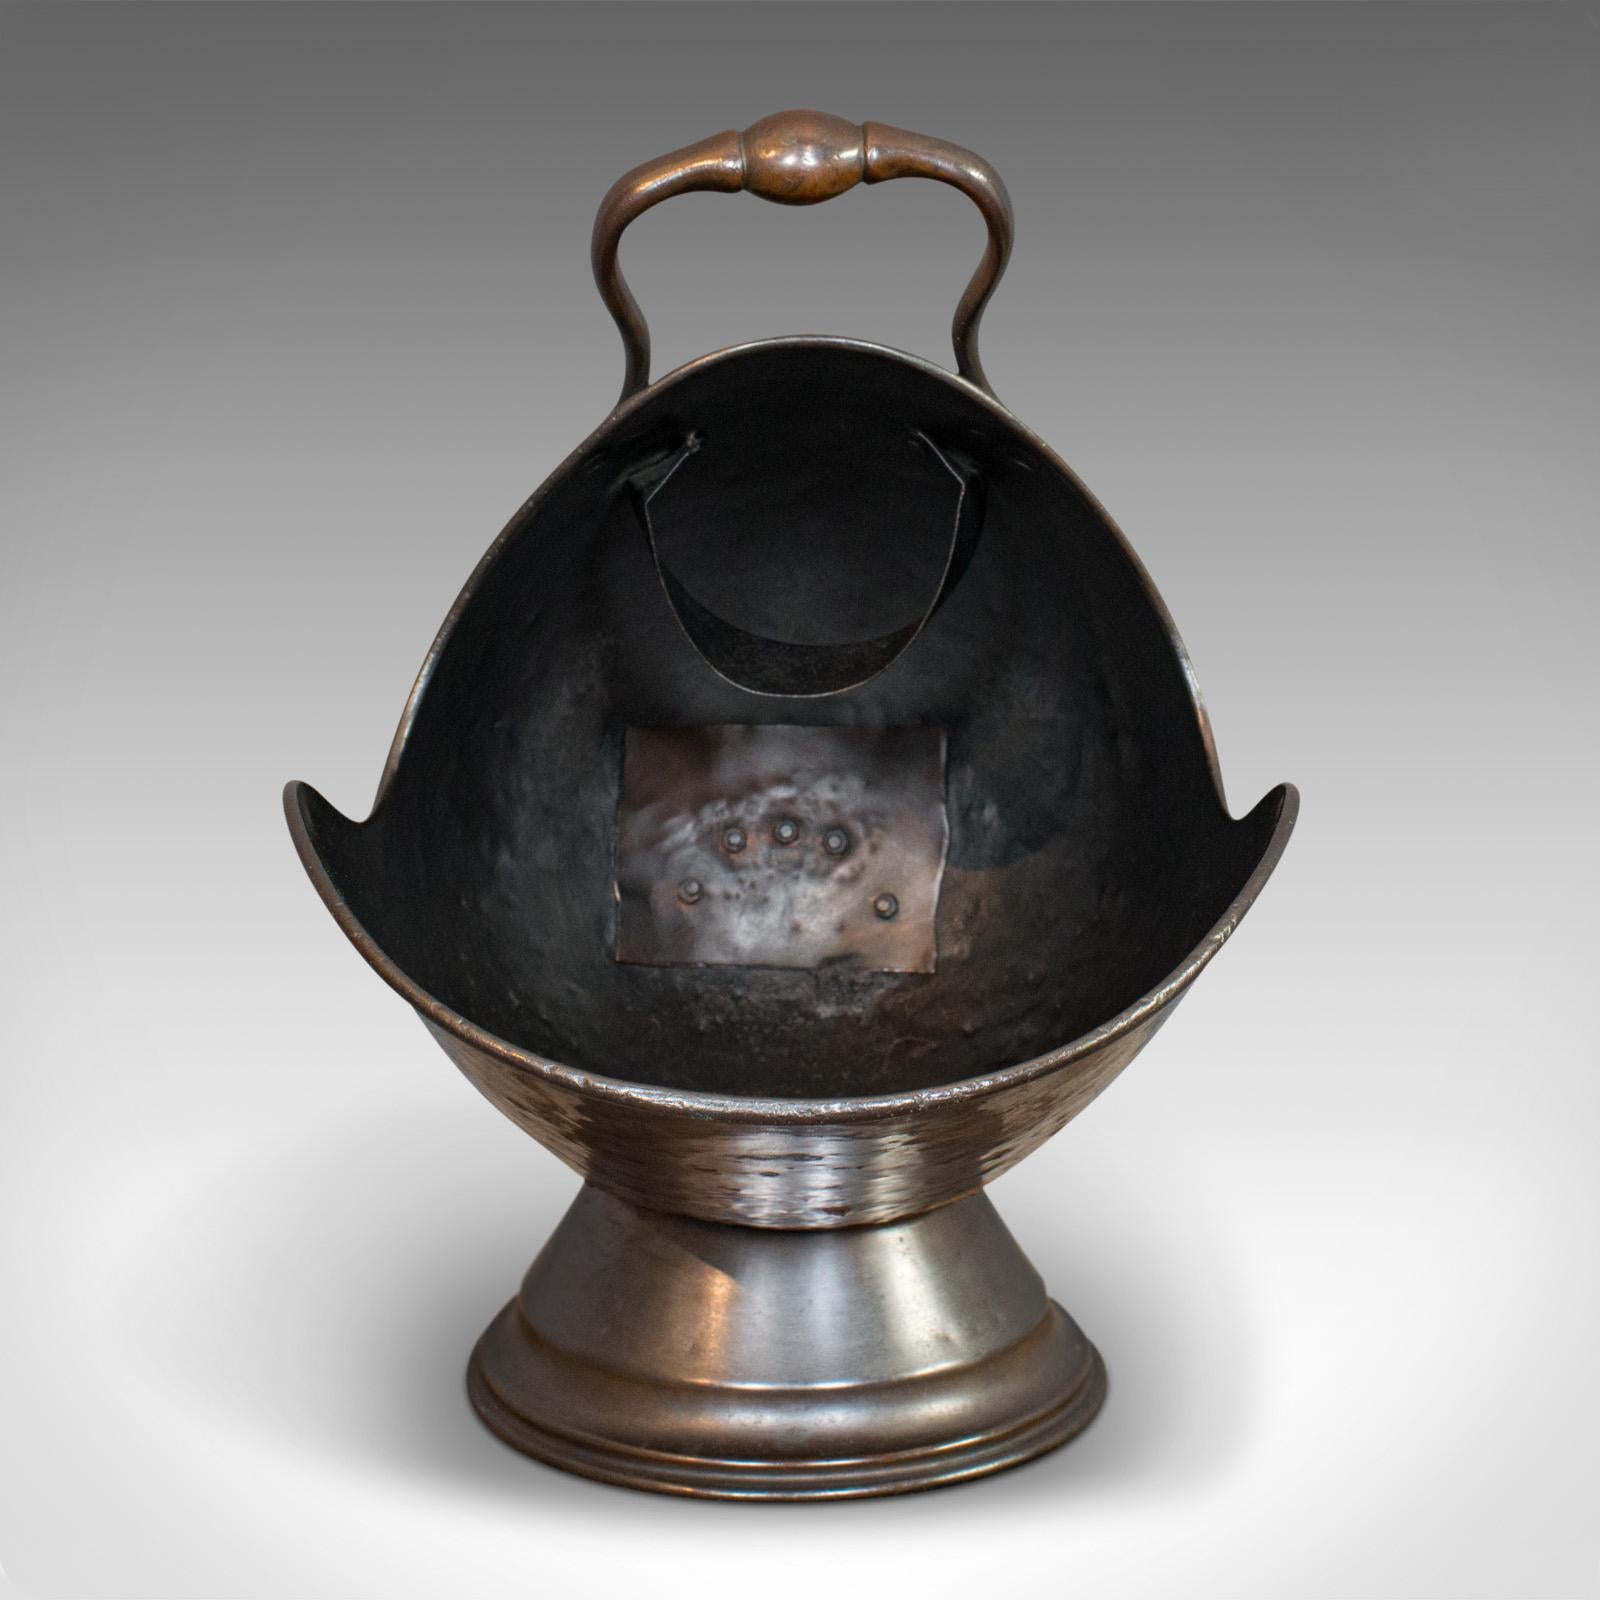 This is an antique helmet coal scuttle. An English, copper fireside log bucket, dating to the Victorian period, circa 1880.

Displays a desirable aged patina
Rich copper tones and hues
Complete with copper coal scoop and elegant brass fire